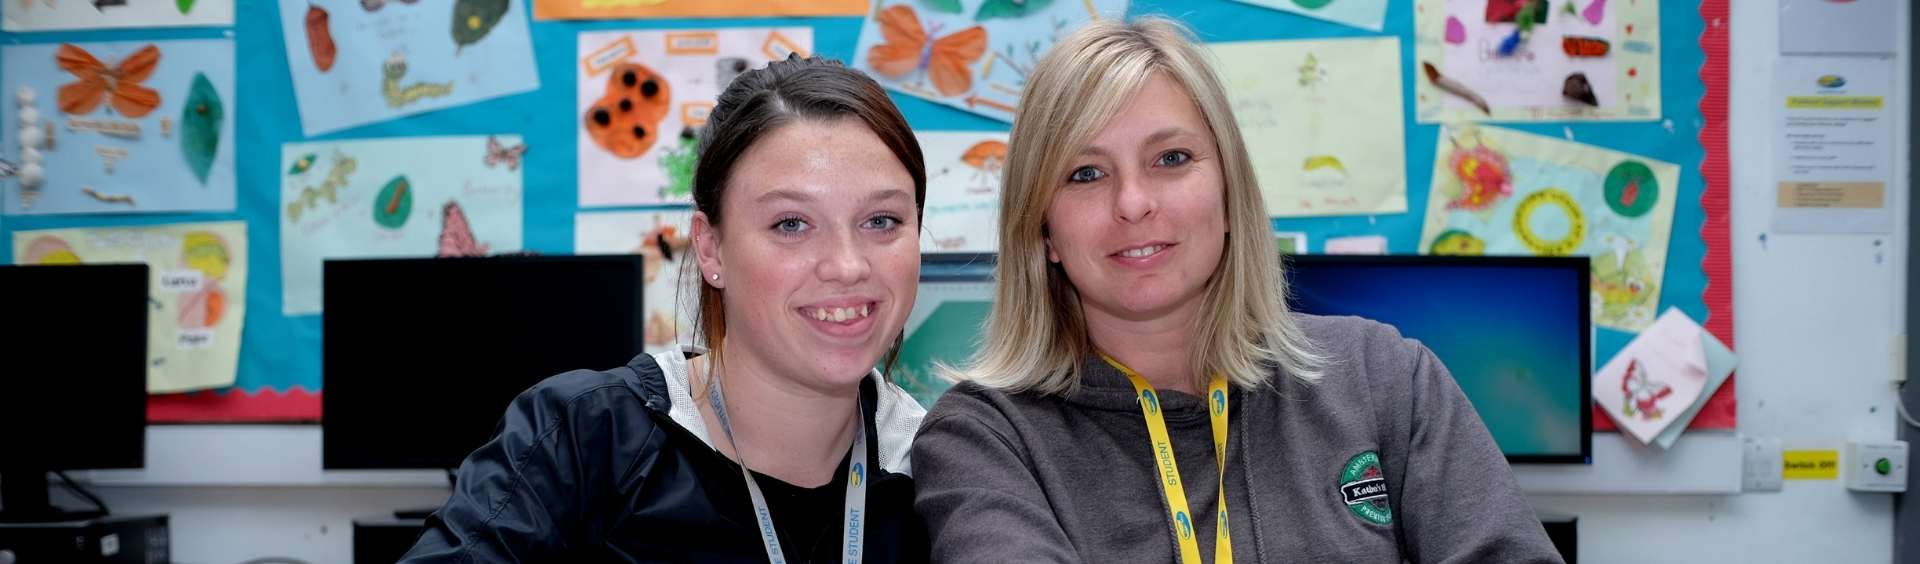 Two Wirral Met Supporting Teaching and Learning in Schools students sitting in classroom